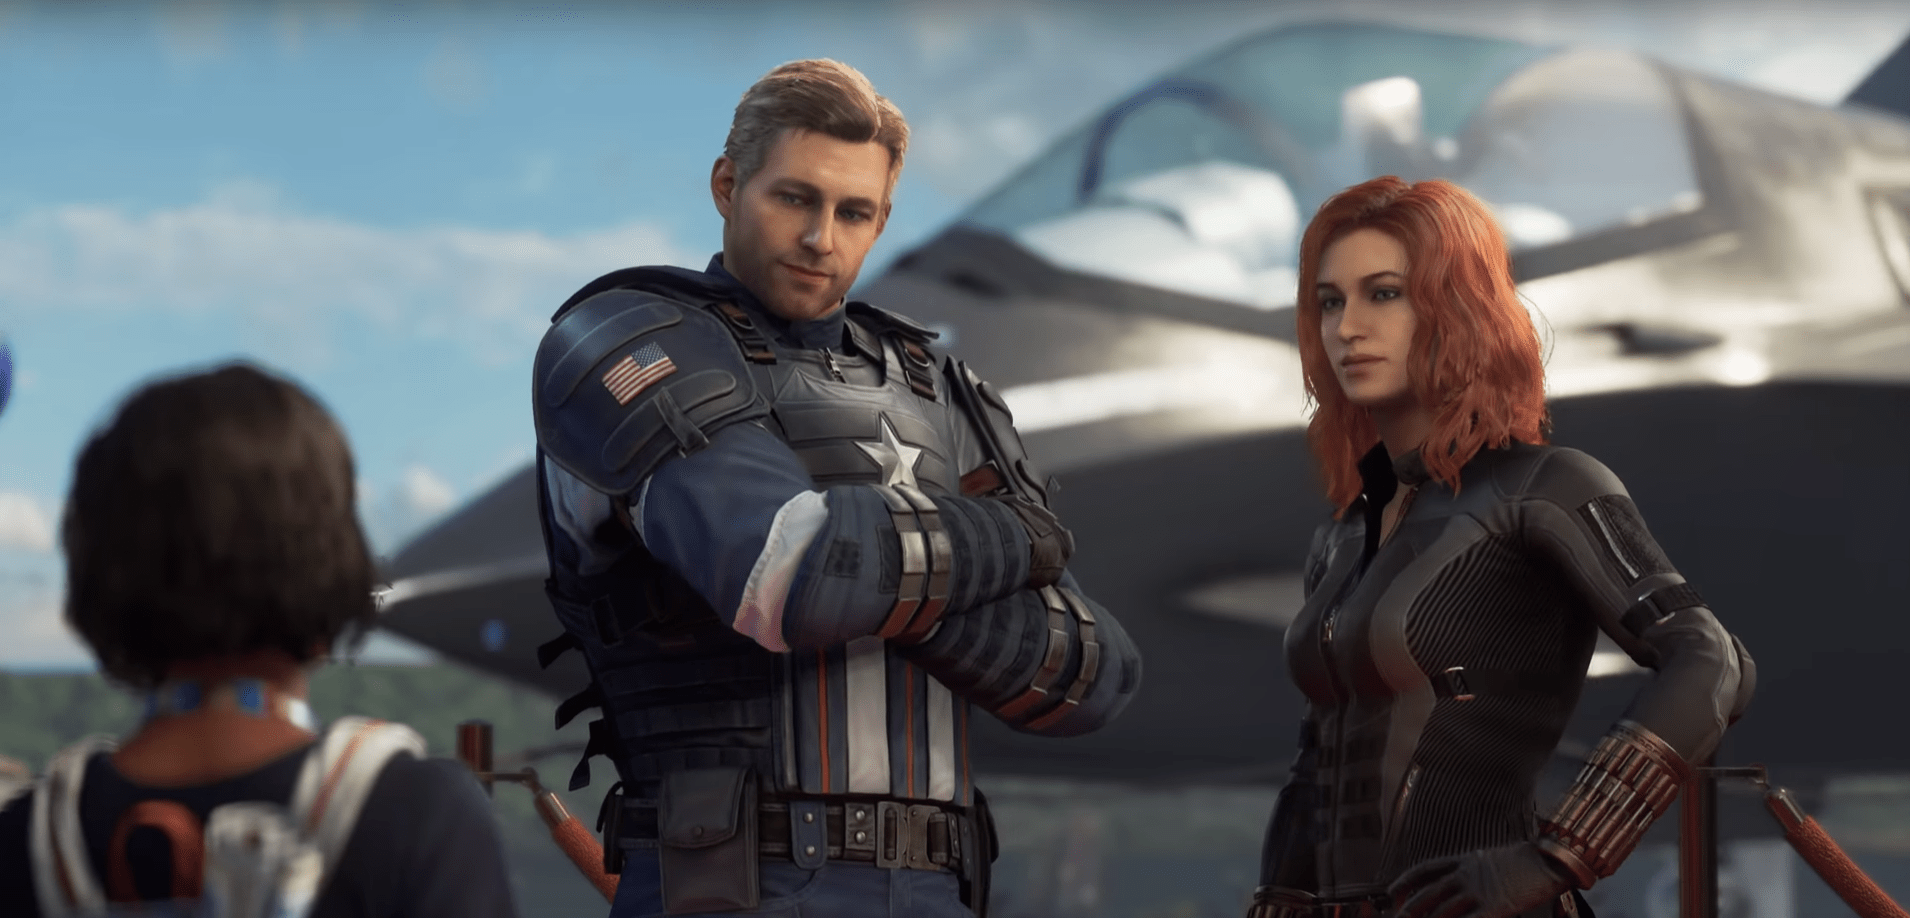 Marvel’s Avengers Game Gets A Game Overview Trailer – Shows Off The Gameplay And Plotline